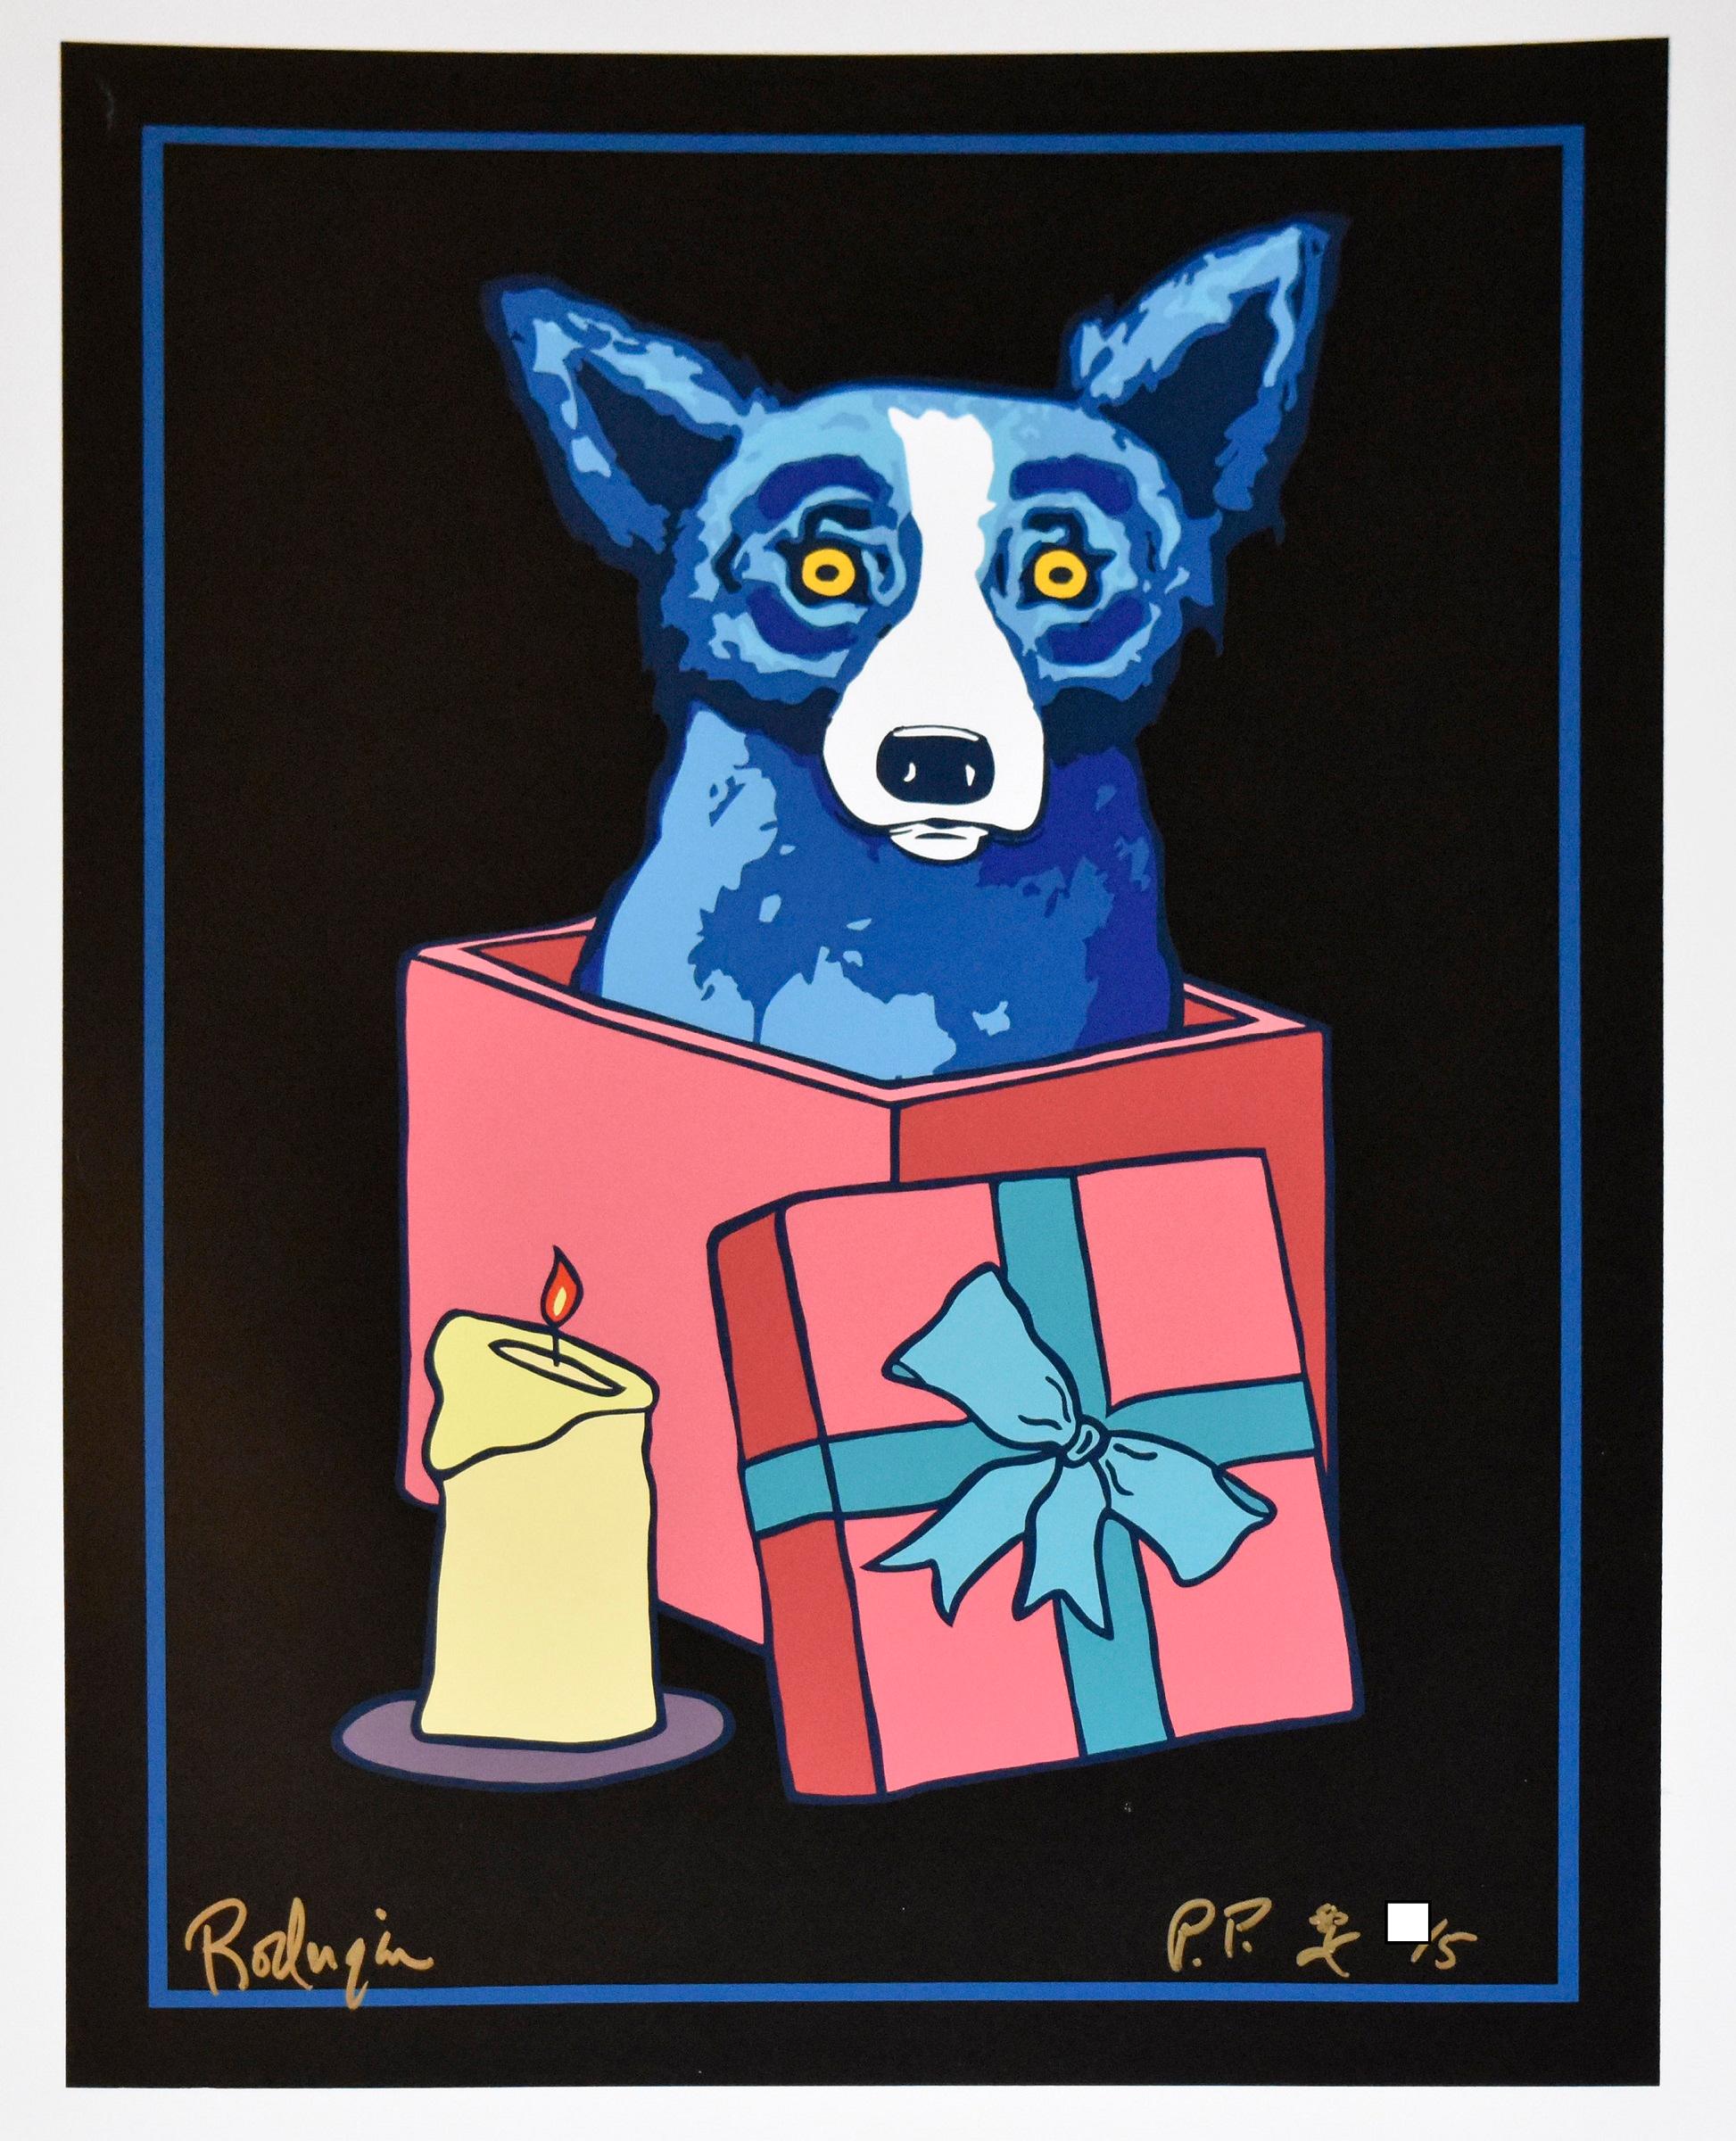 George Rodrigue Animal Print - Jingle My Bells At Night - Remarqued w/Flower - Signed Silkscreen - Blue Dog